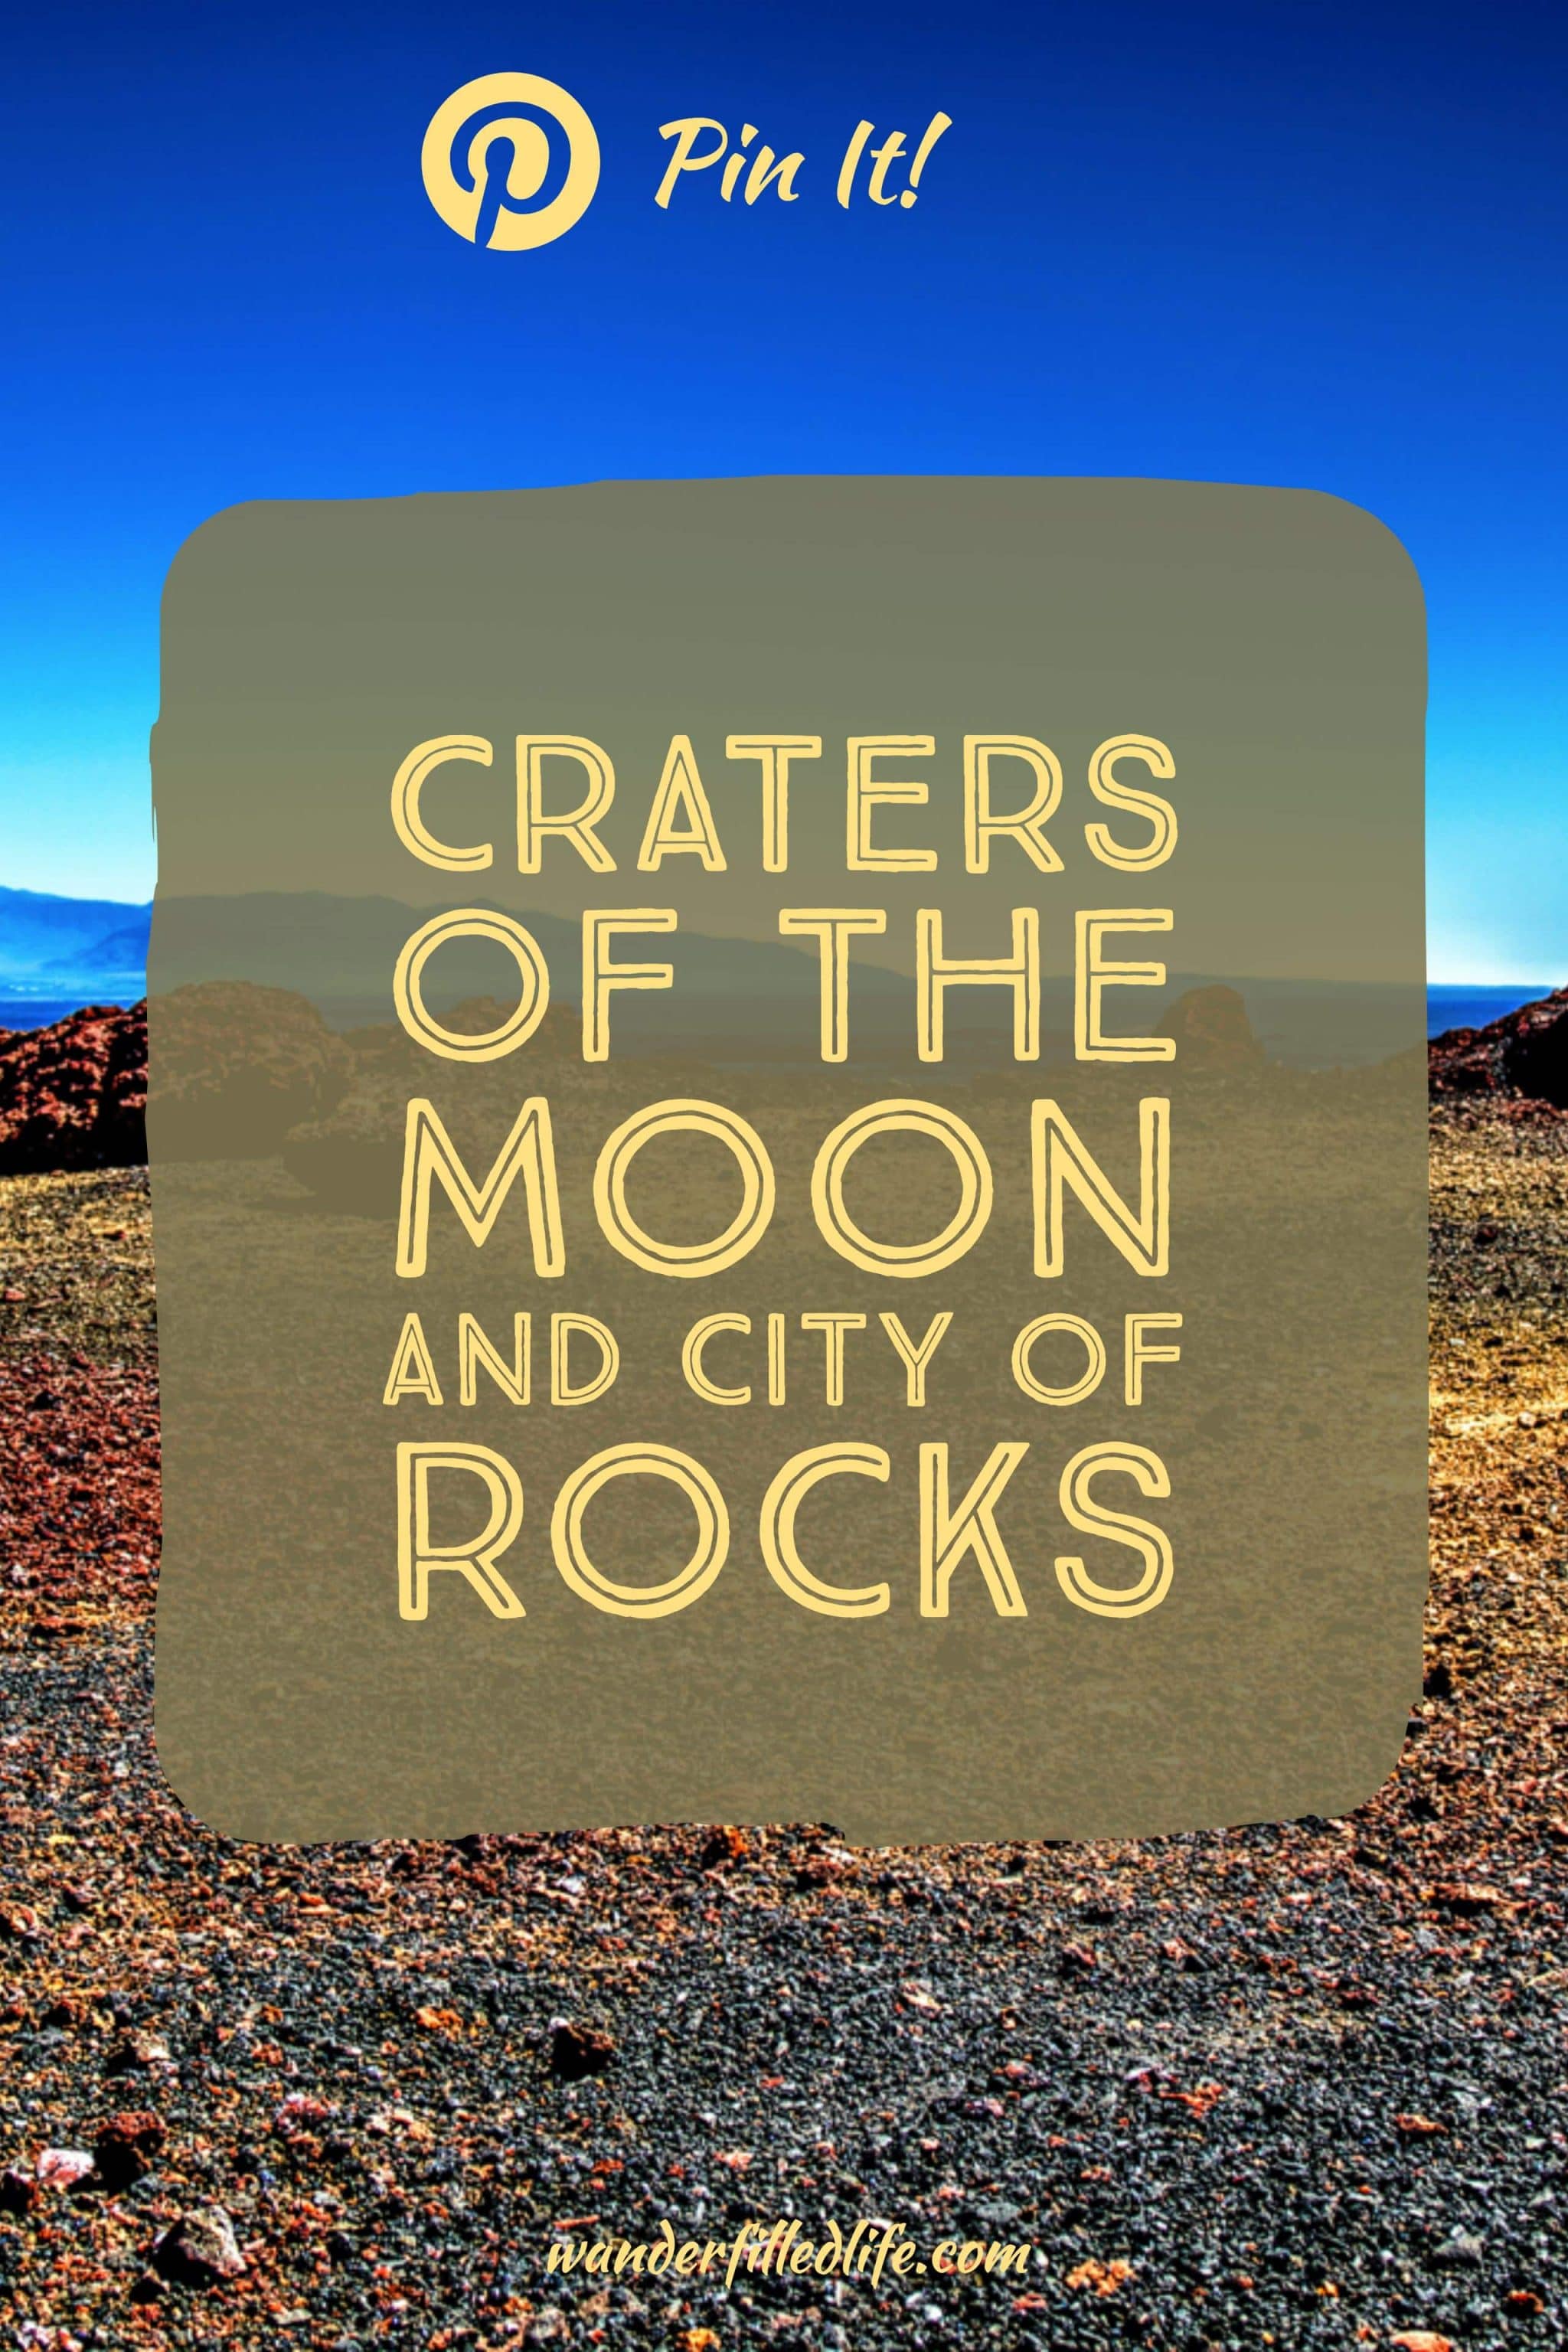 Southern Idaho is home to two very unique geologic sites: Craters of the Moon National Monument and City of Rocks National Reserve.